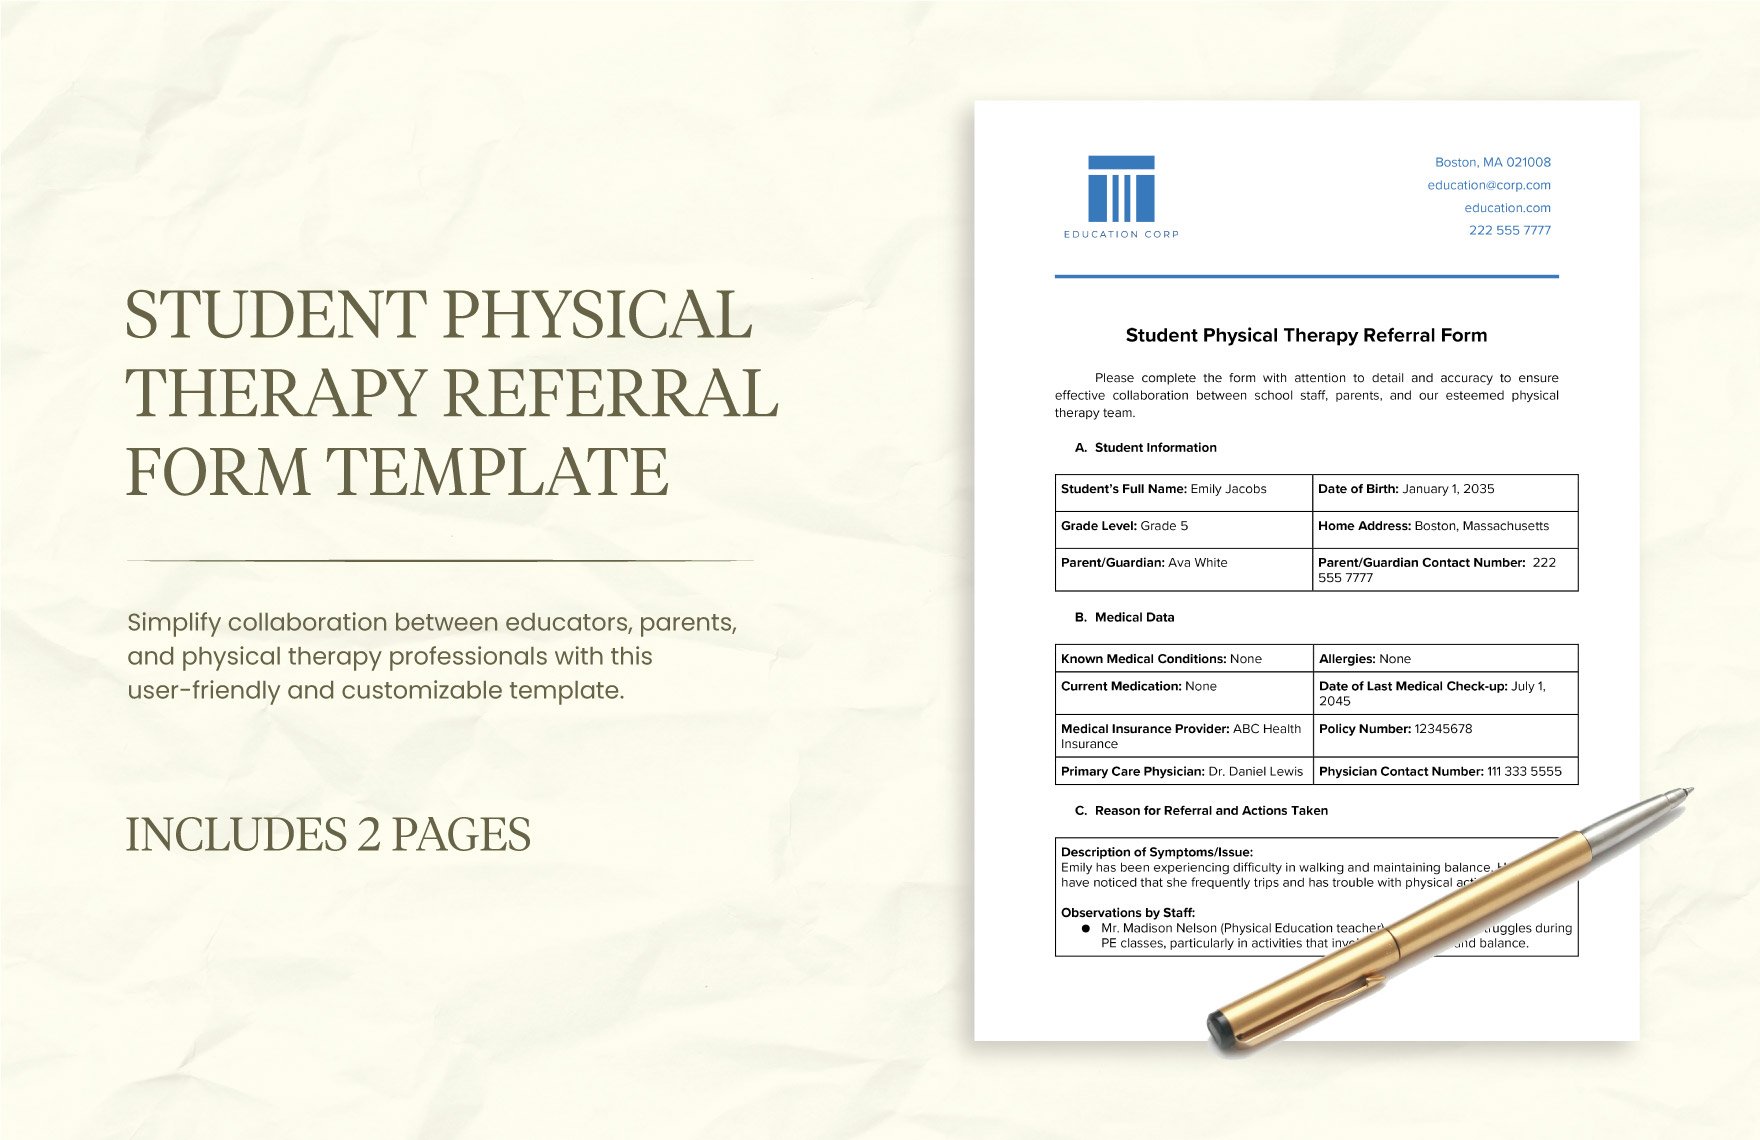 Student Physical Therapy Referral Form Template